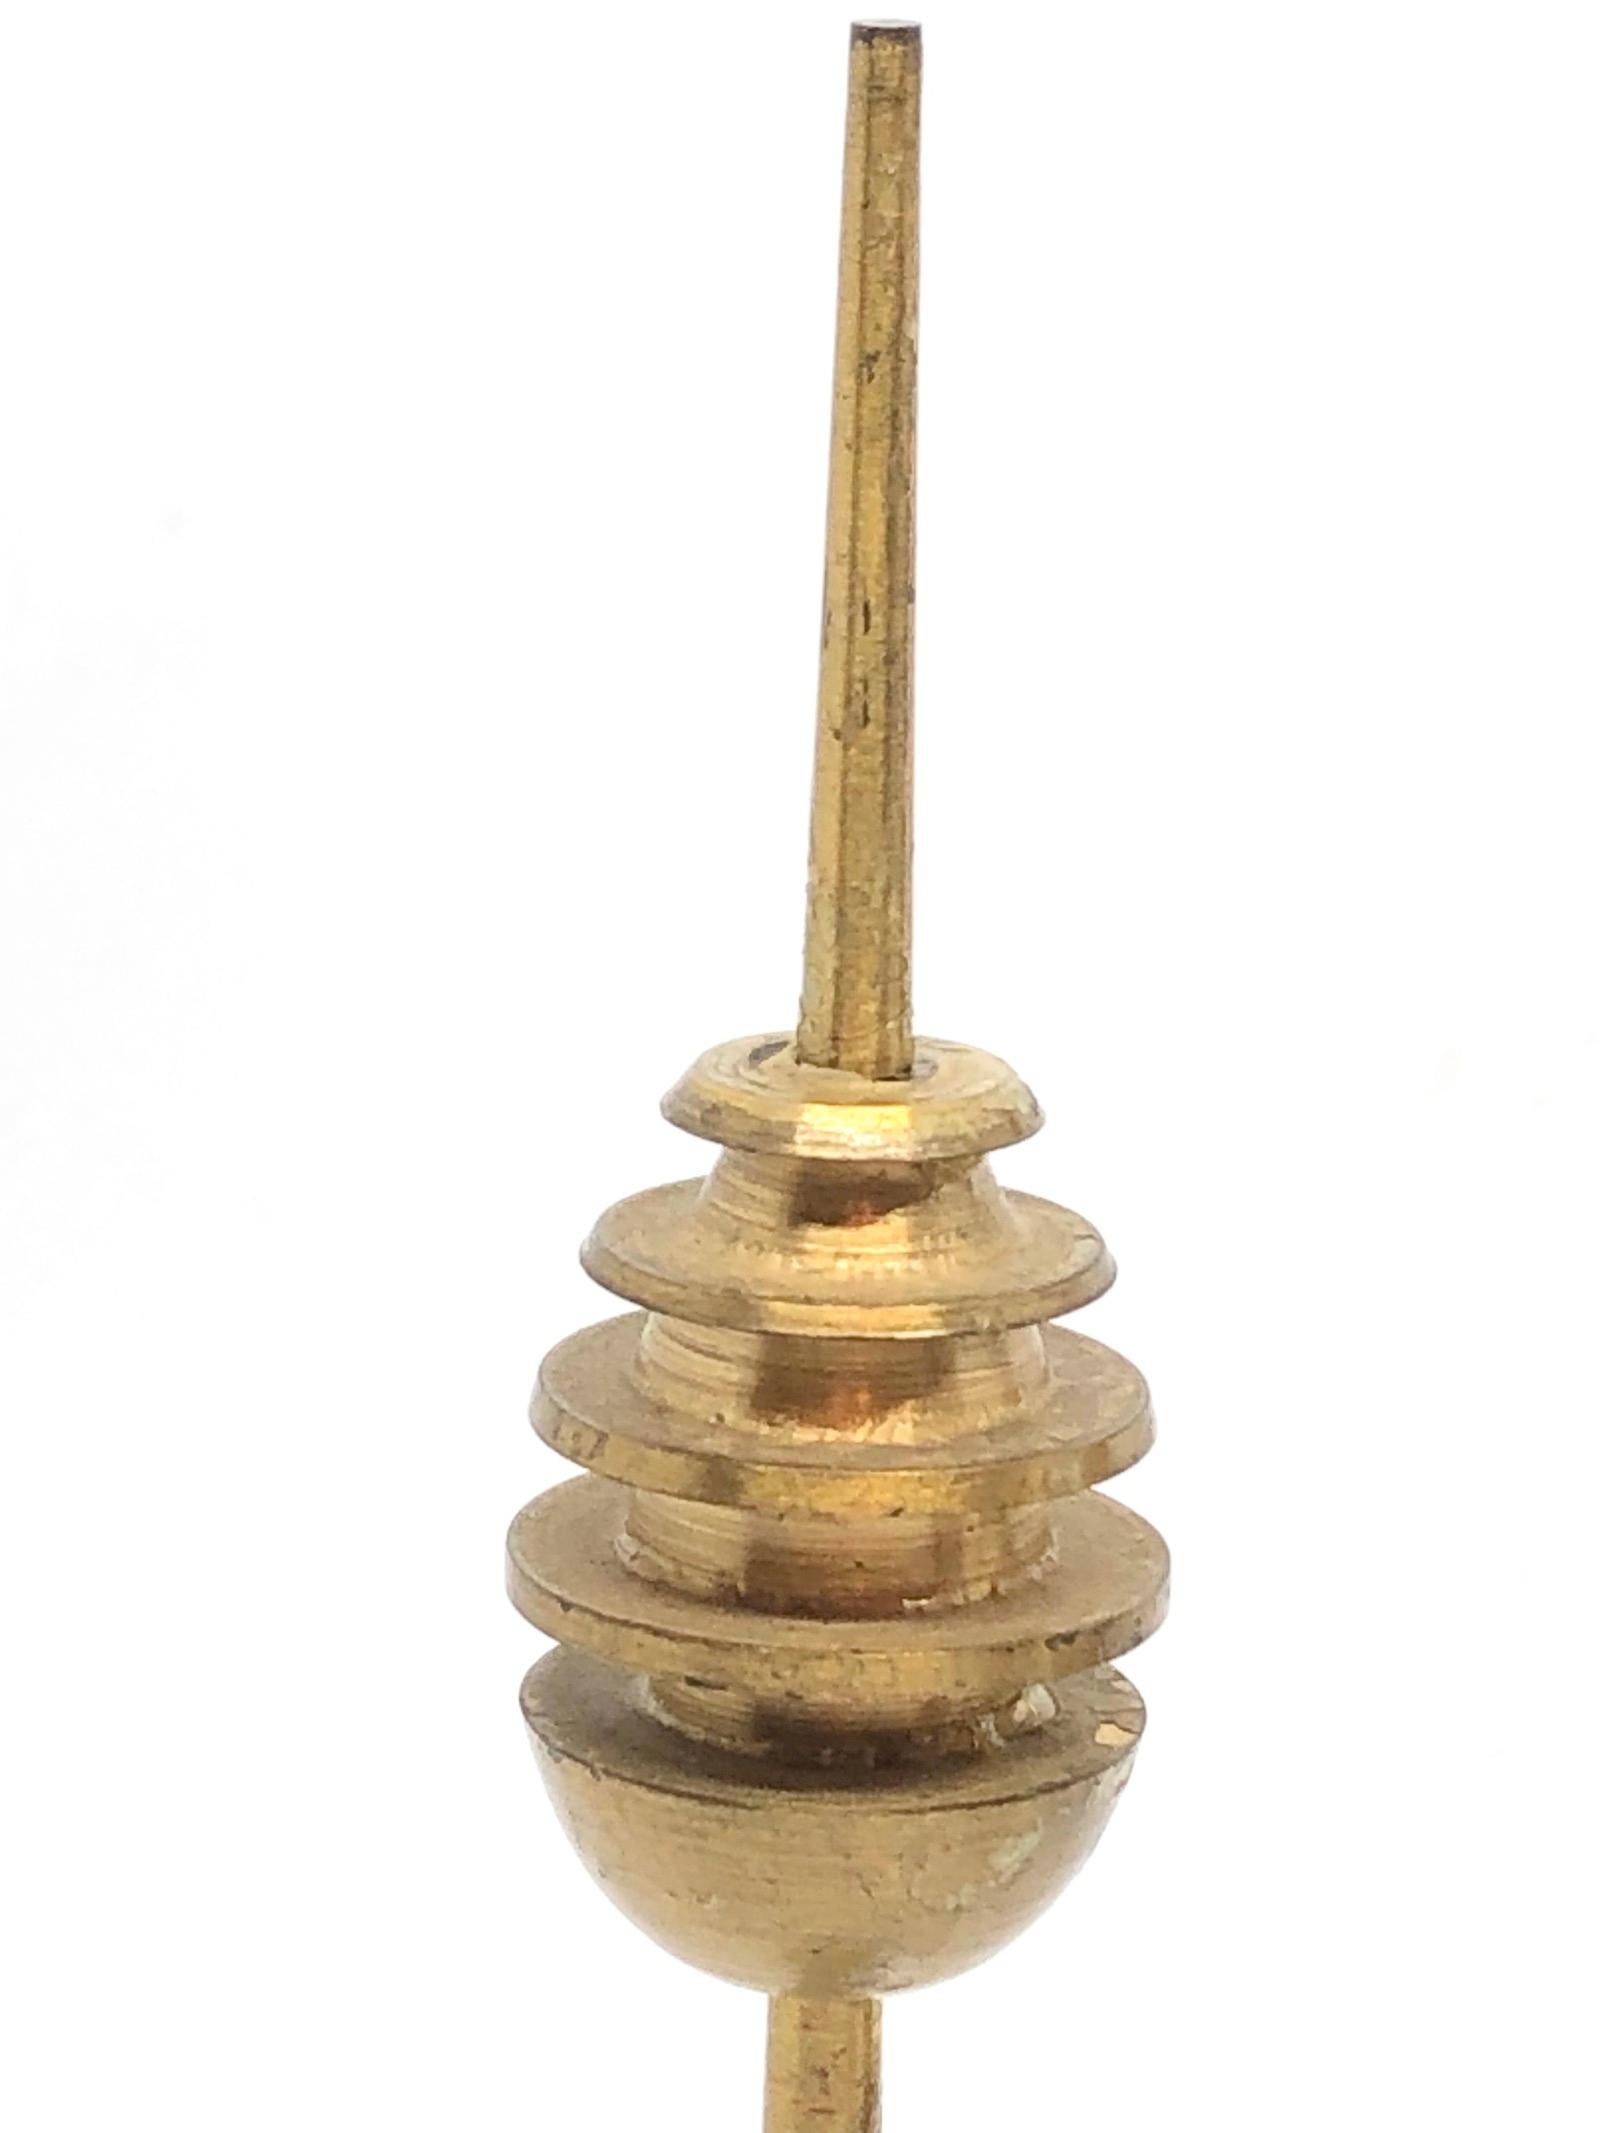 Hand-Crafted Brass Nuremberg TV Television Tower Scale Design Model, 1980s, German